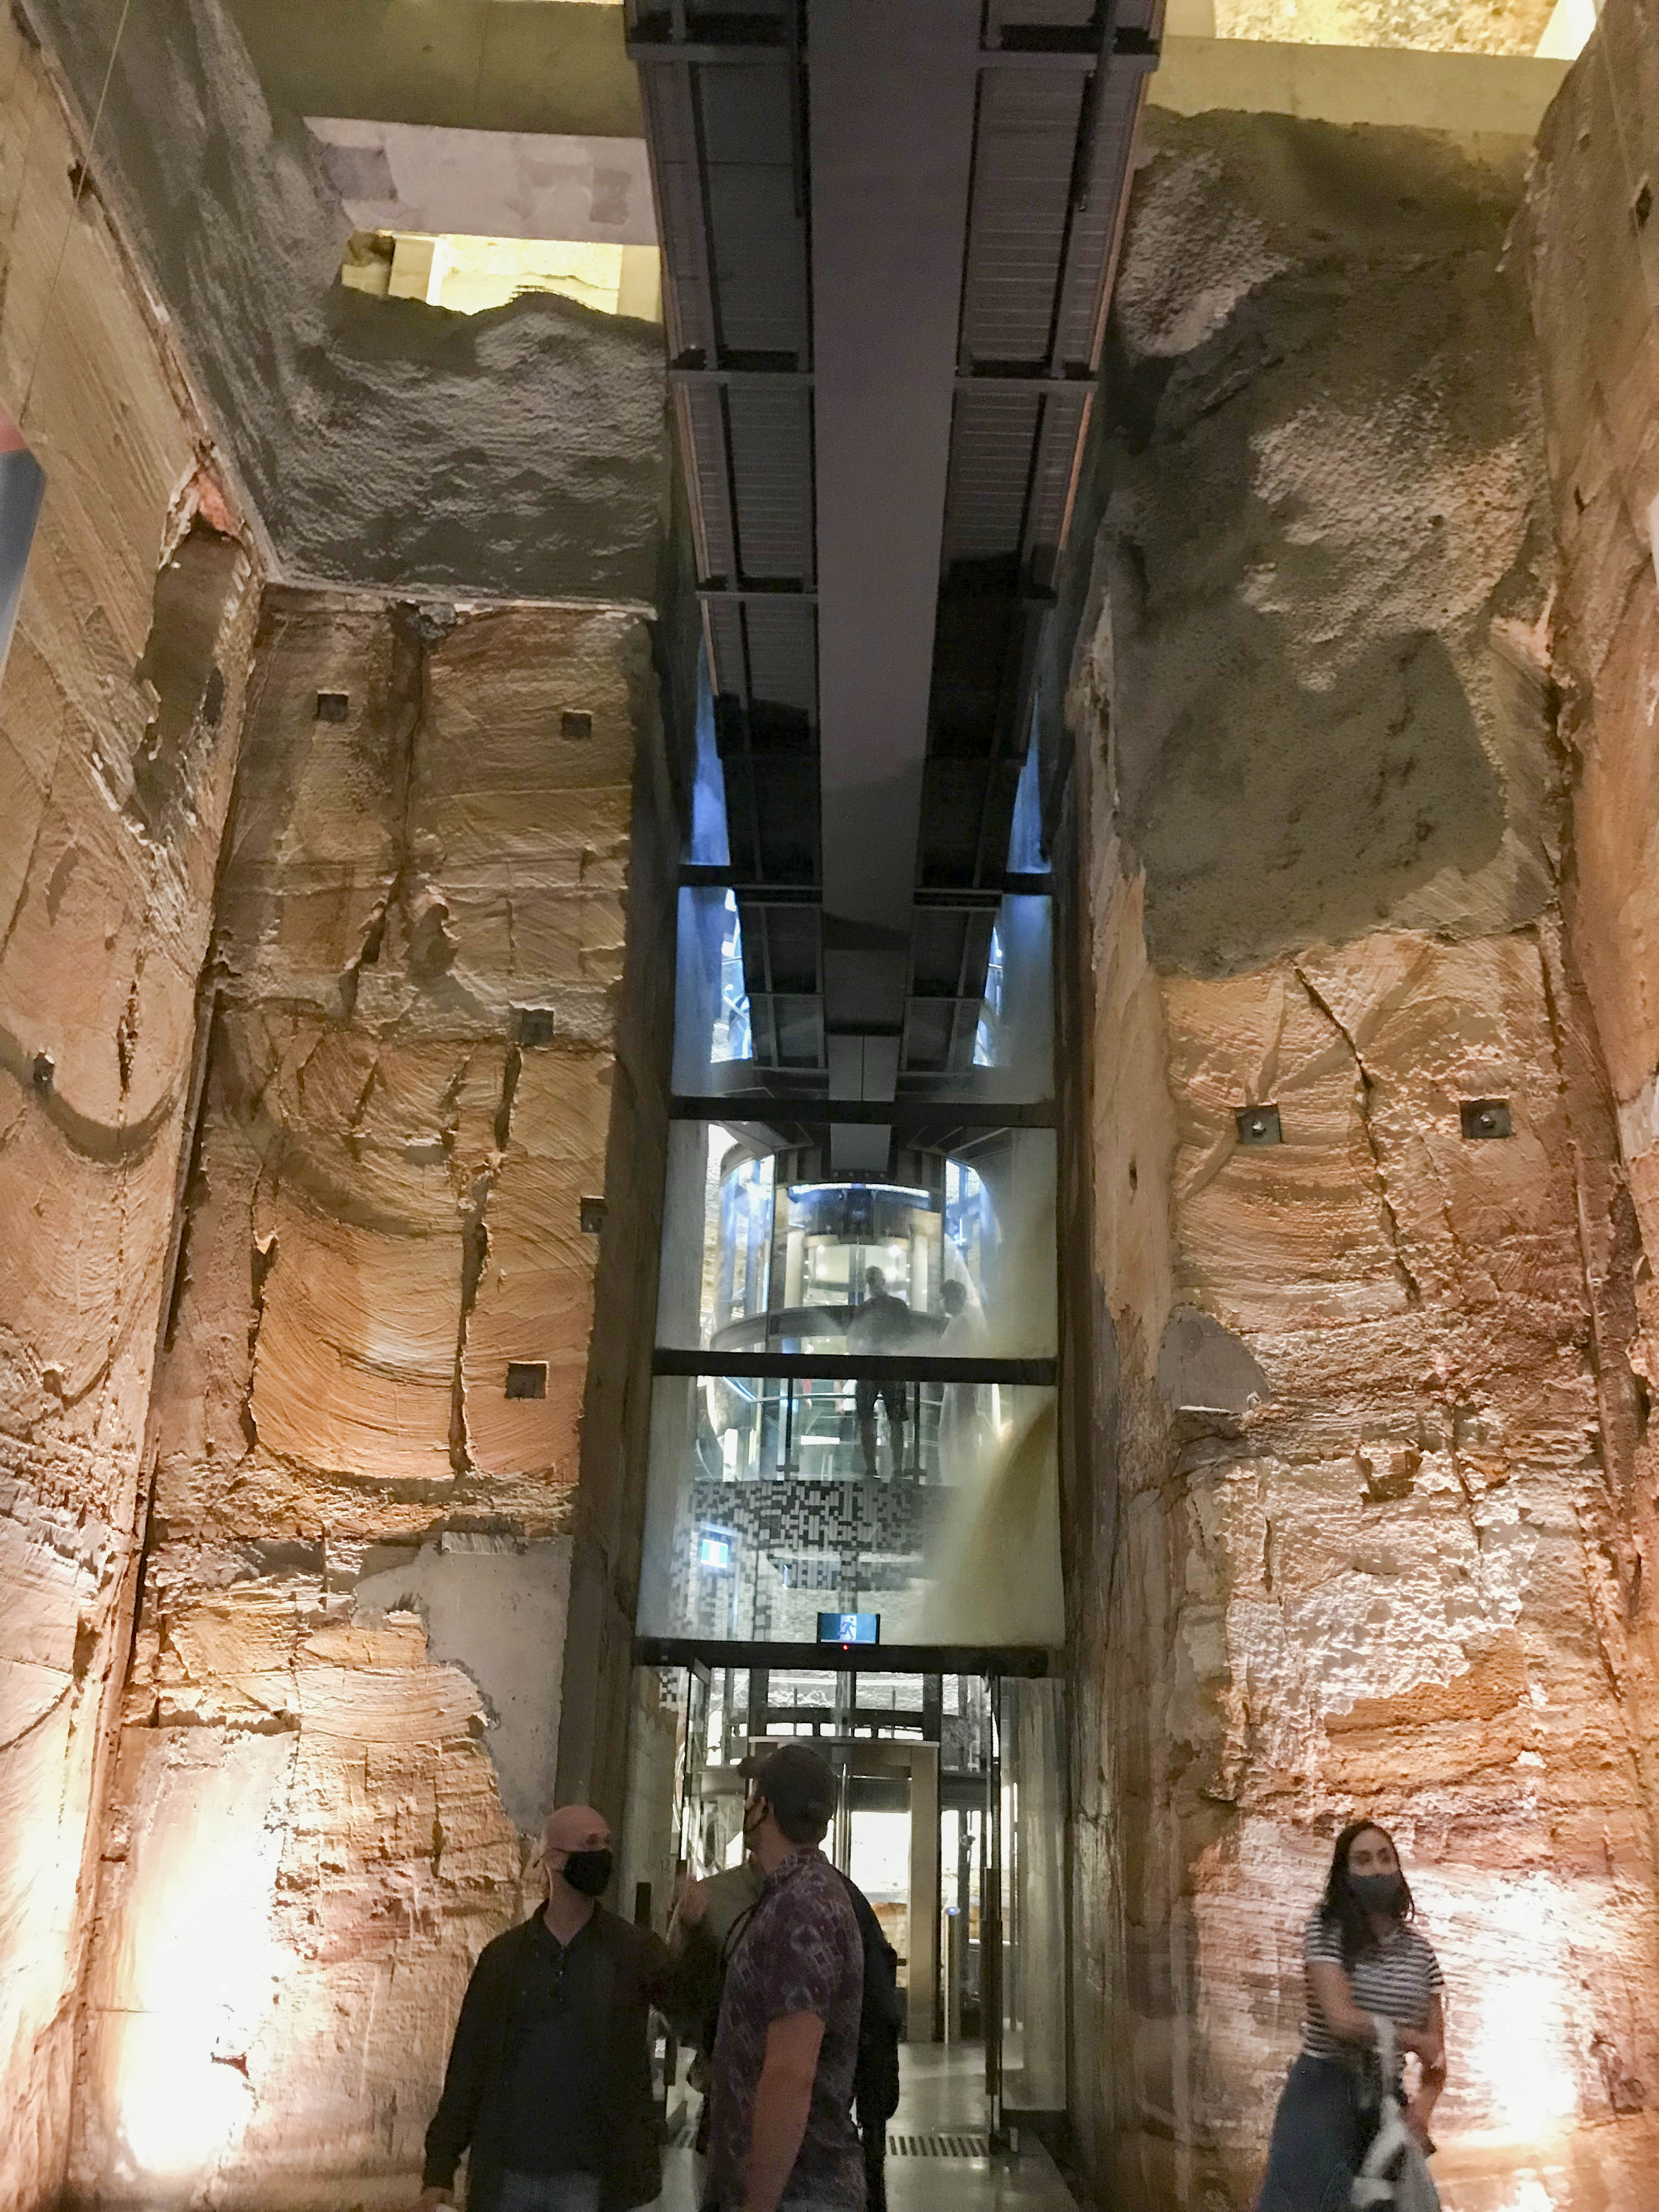 Looking back towards the glass elevator and spiral staircase from the lowest floor.  The outer end of the rock anchors can be seen on the rock face at various locations, typified by small square recesses featuring anchor bar, locking nut and square end plate